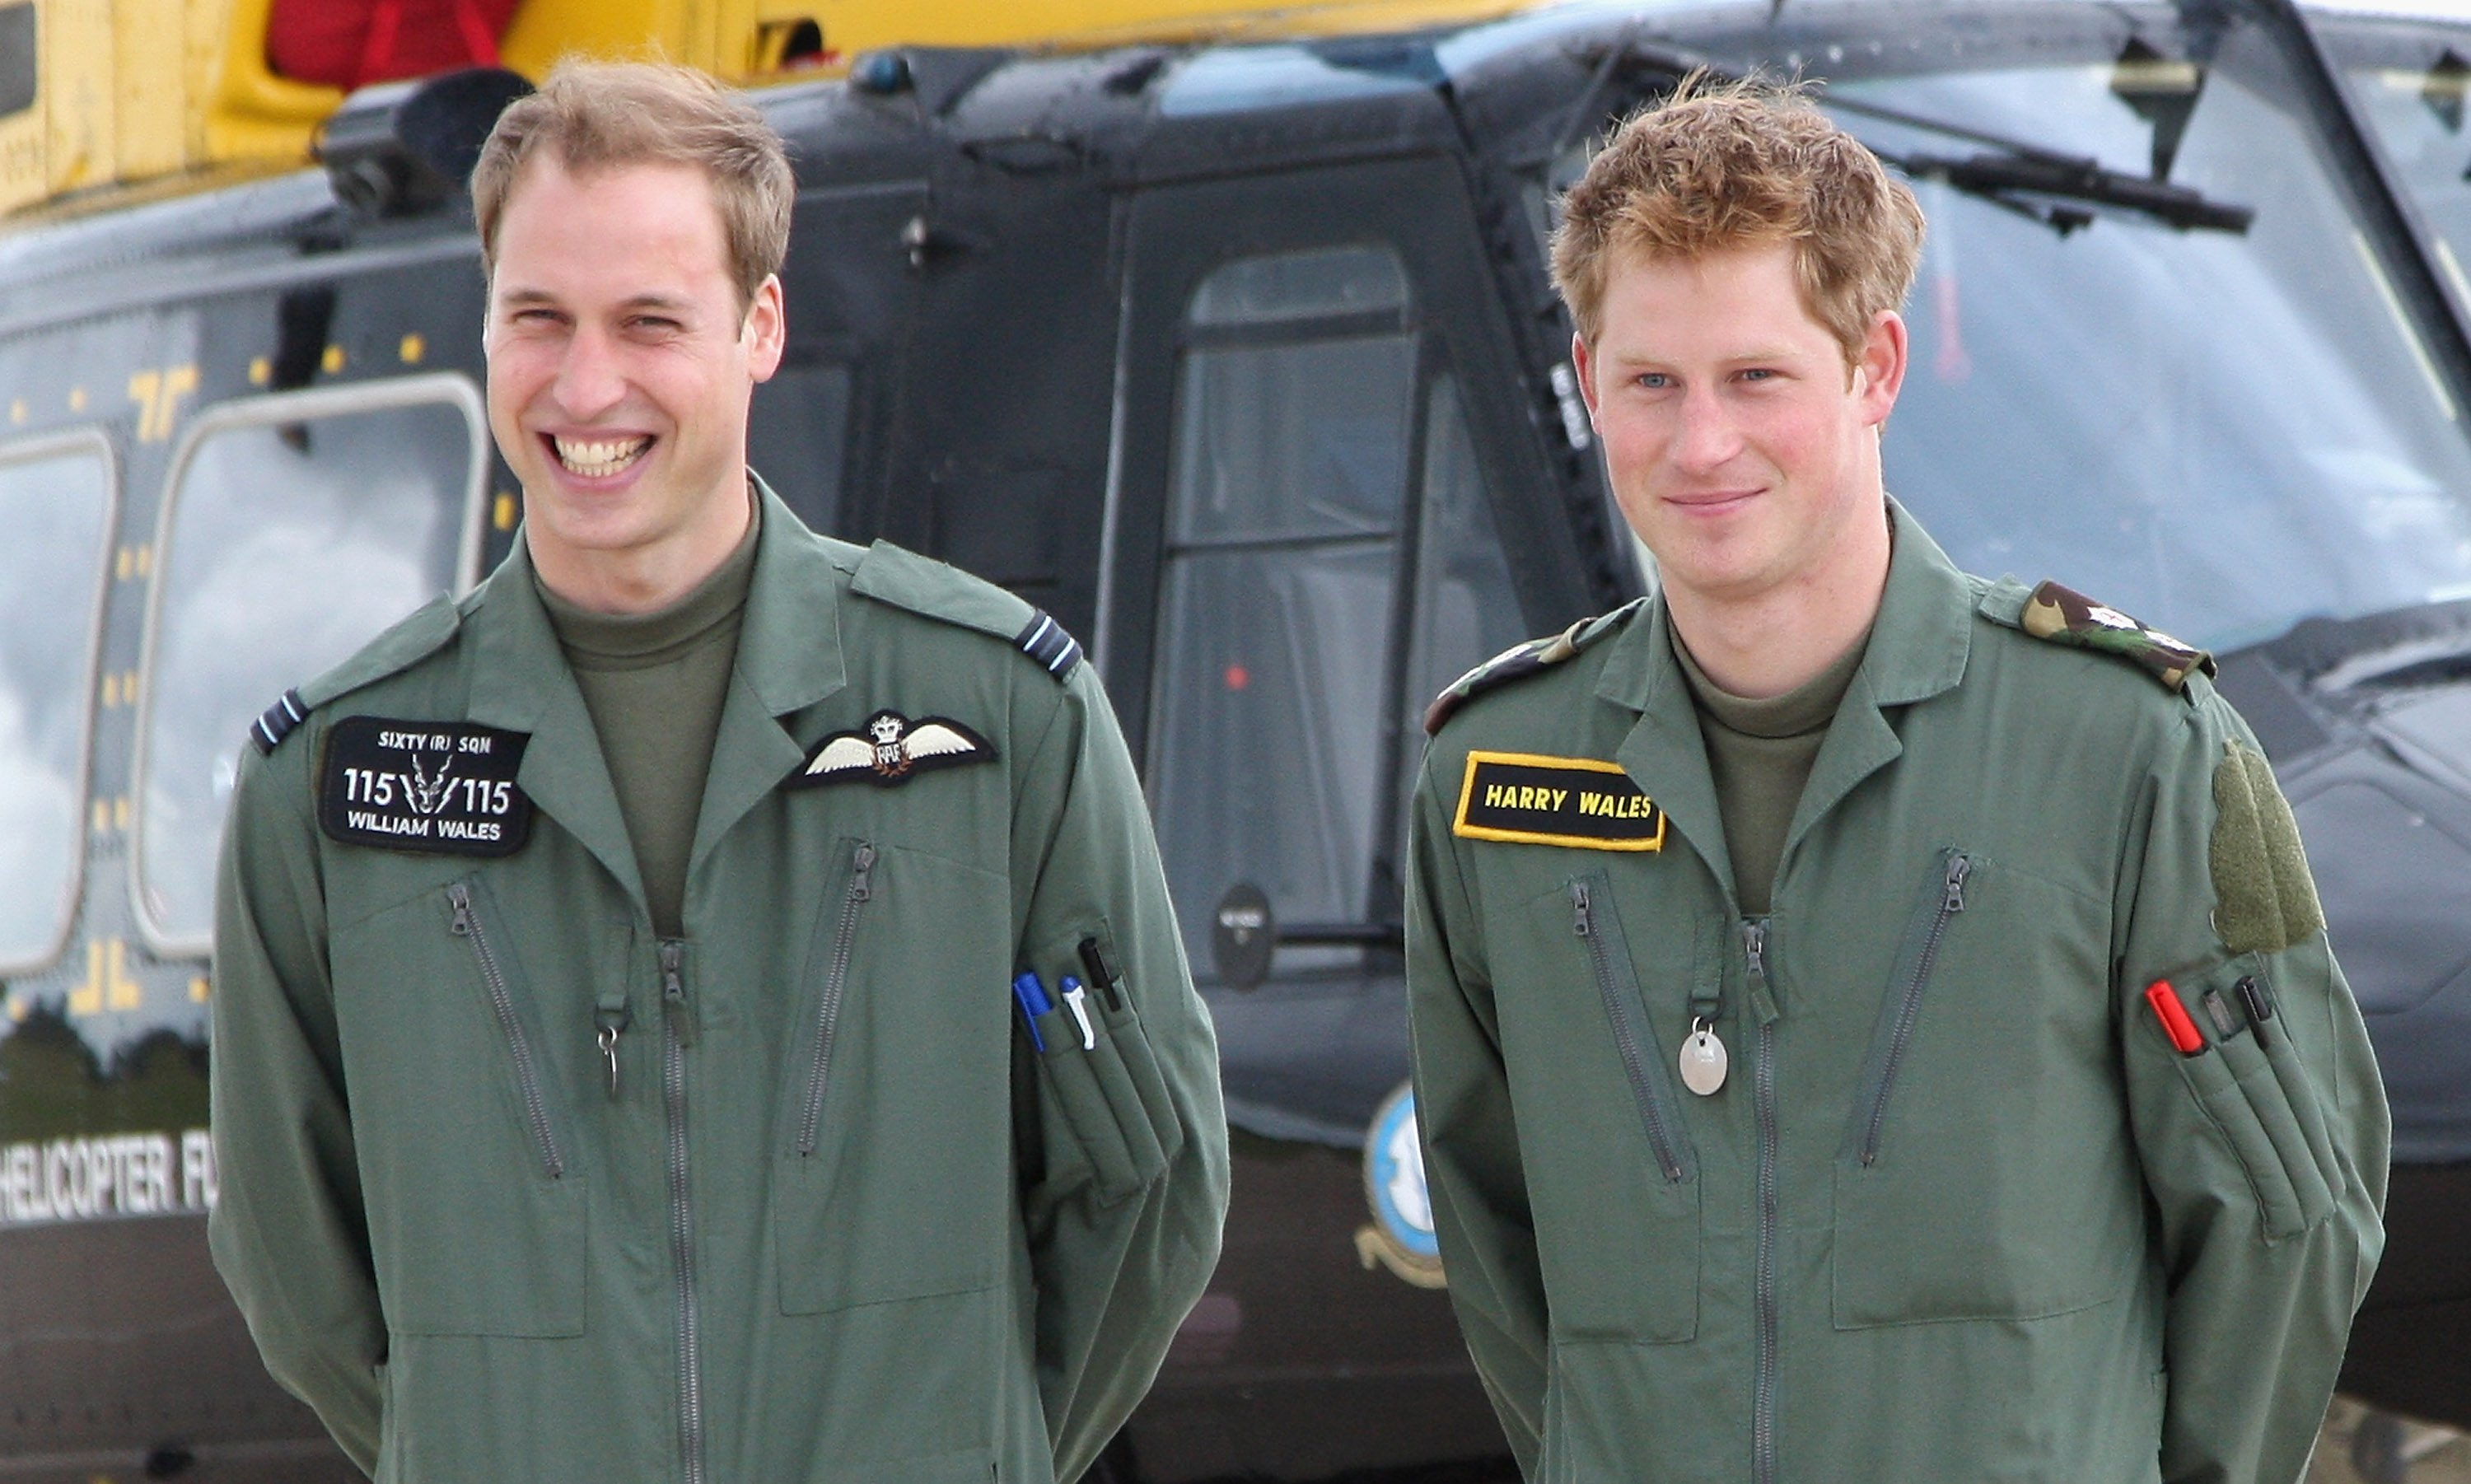 Prince William and Prince Harry pose in front of a Griffin helicopter during a photocall at RAF Shawbury on June 18, 2009, in Shawbury, England. | Source: Getty Images